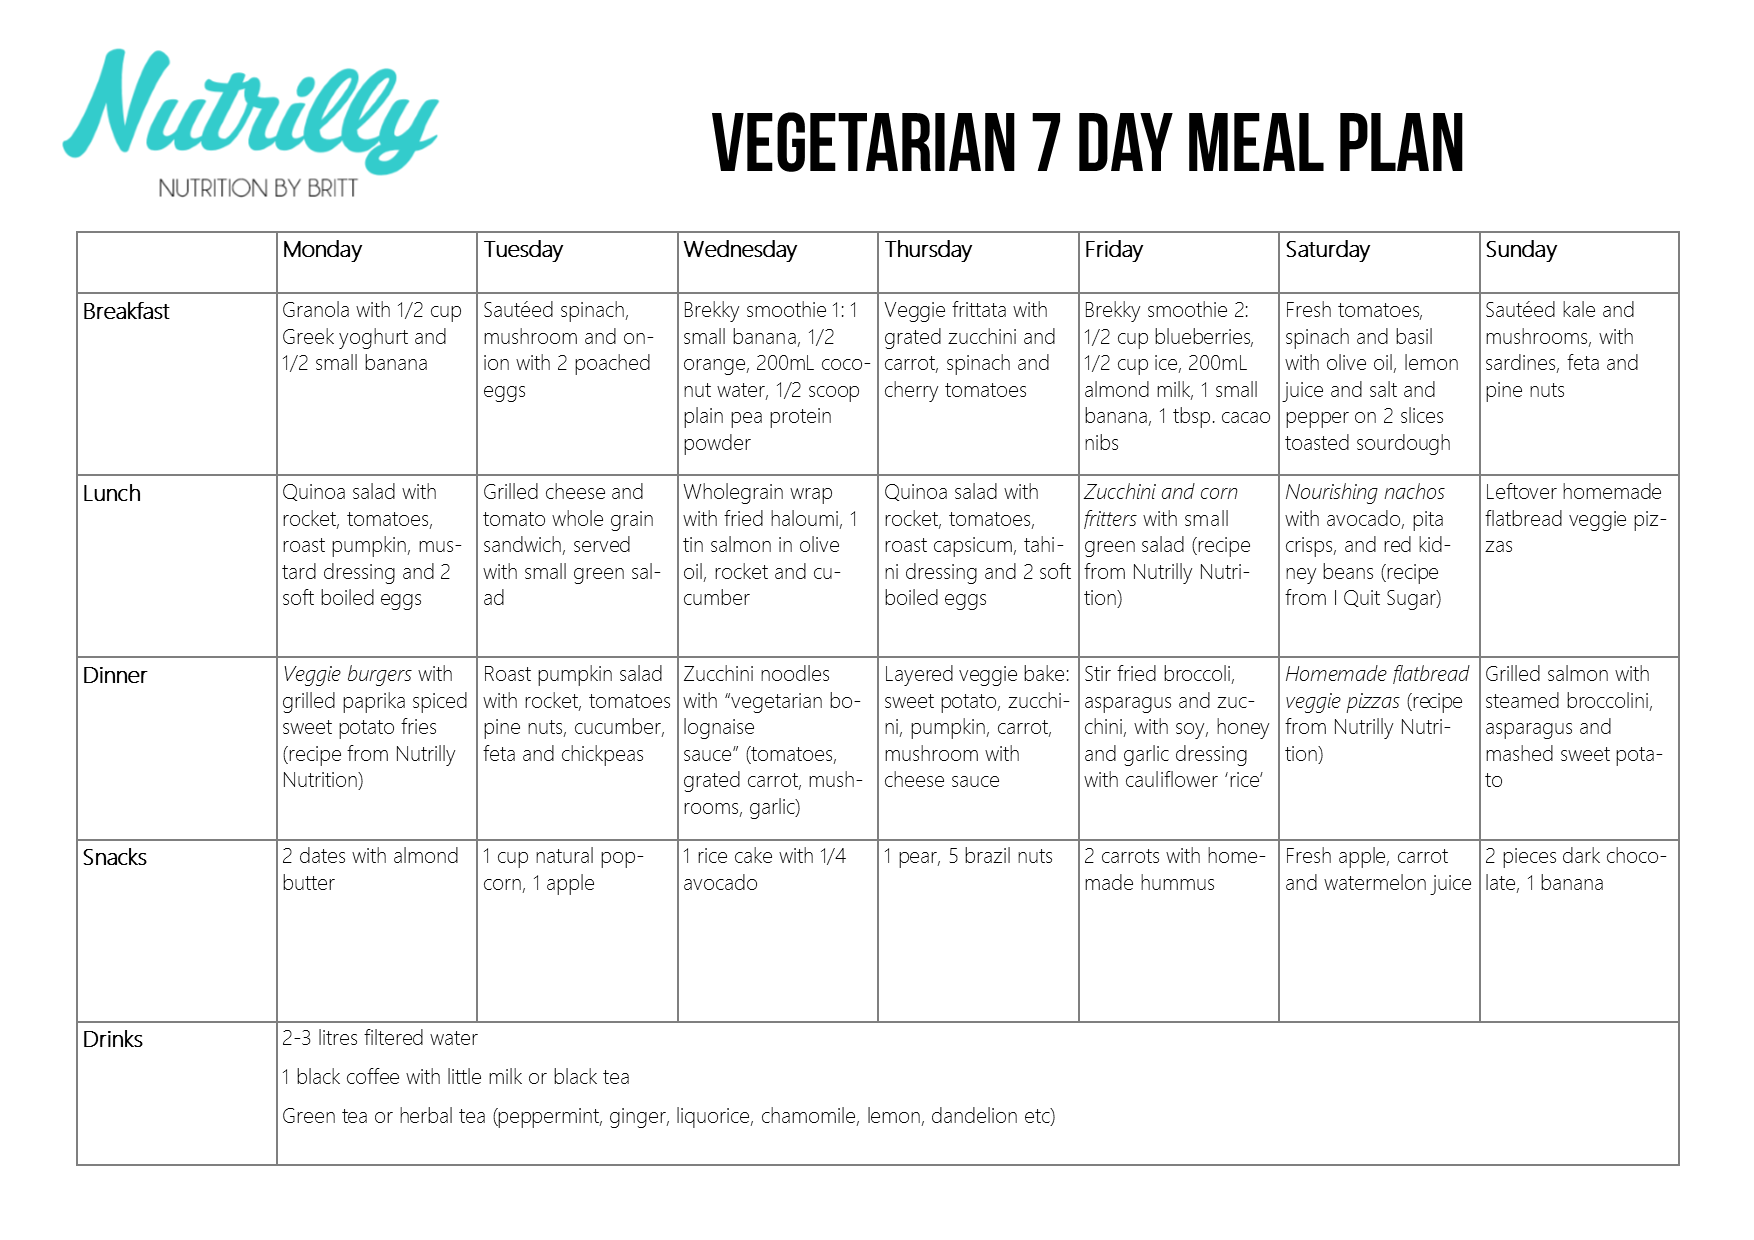 Vegetarian 7 day meal plan png 1754 1240 Planificaci n 